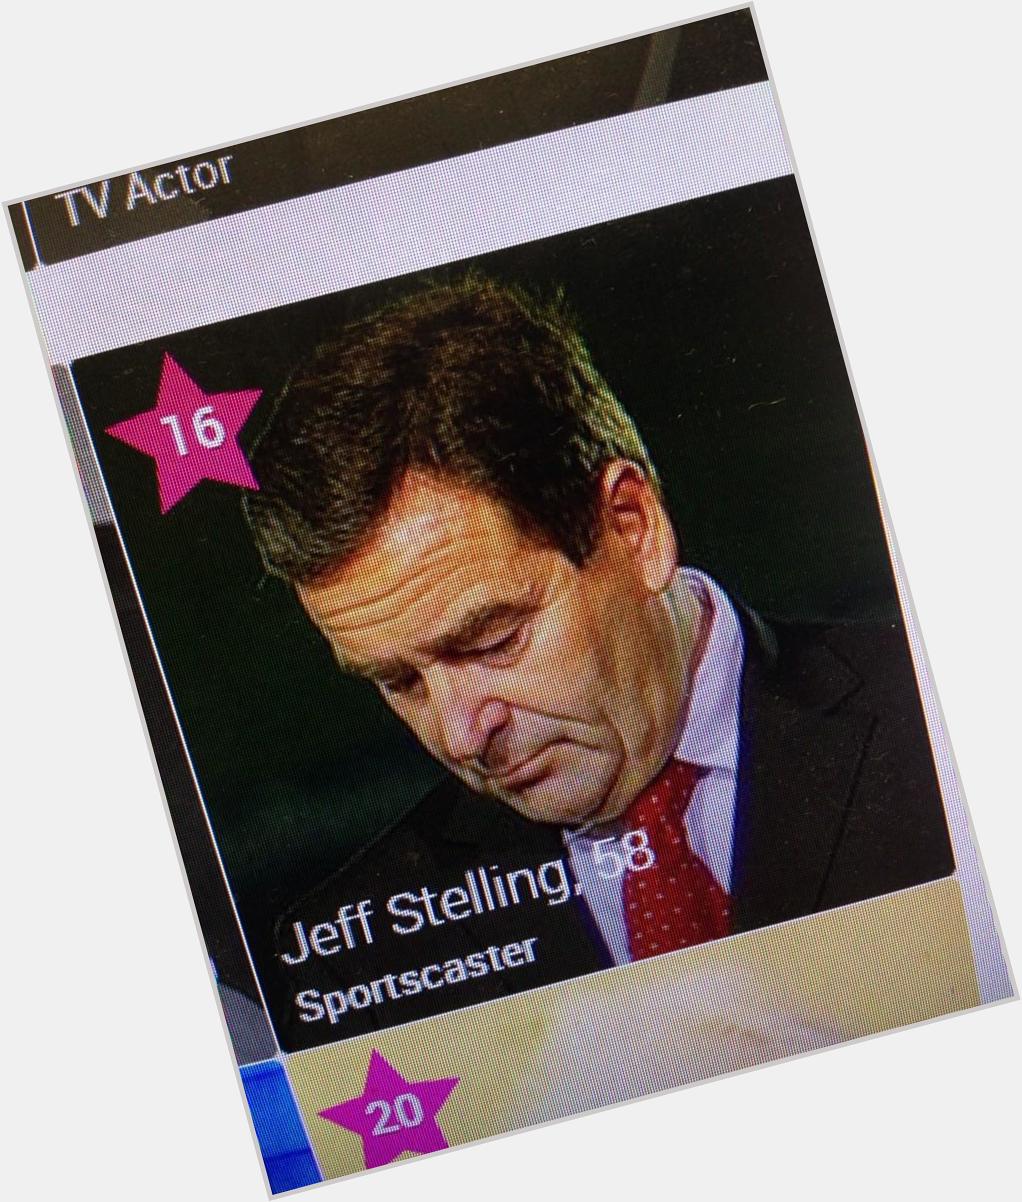 Same birthday as Jeff Stelling. Im happy with that 